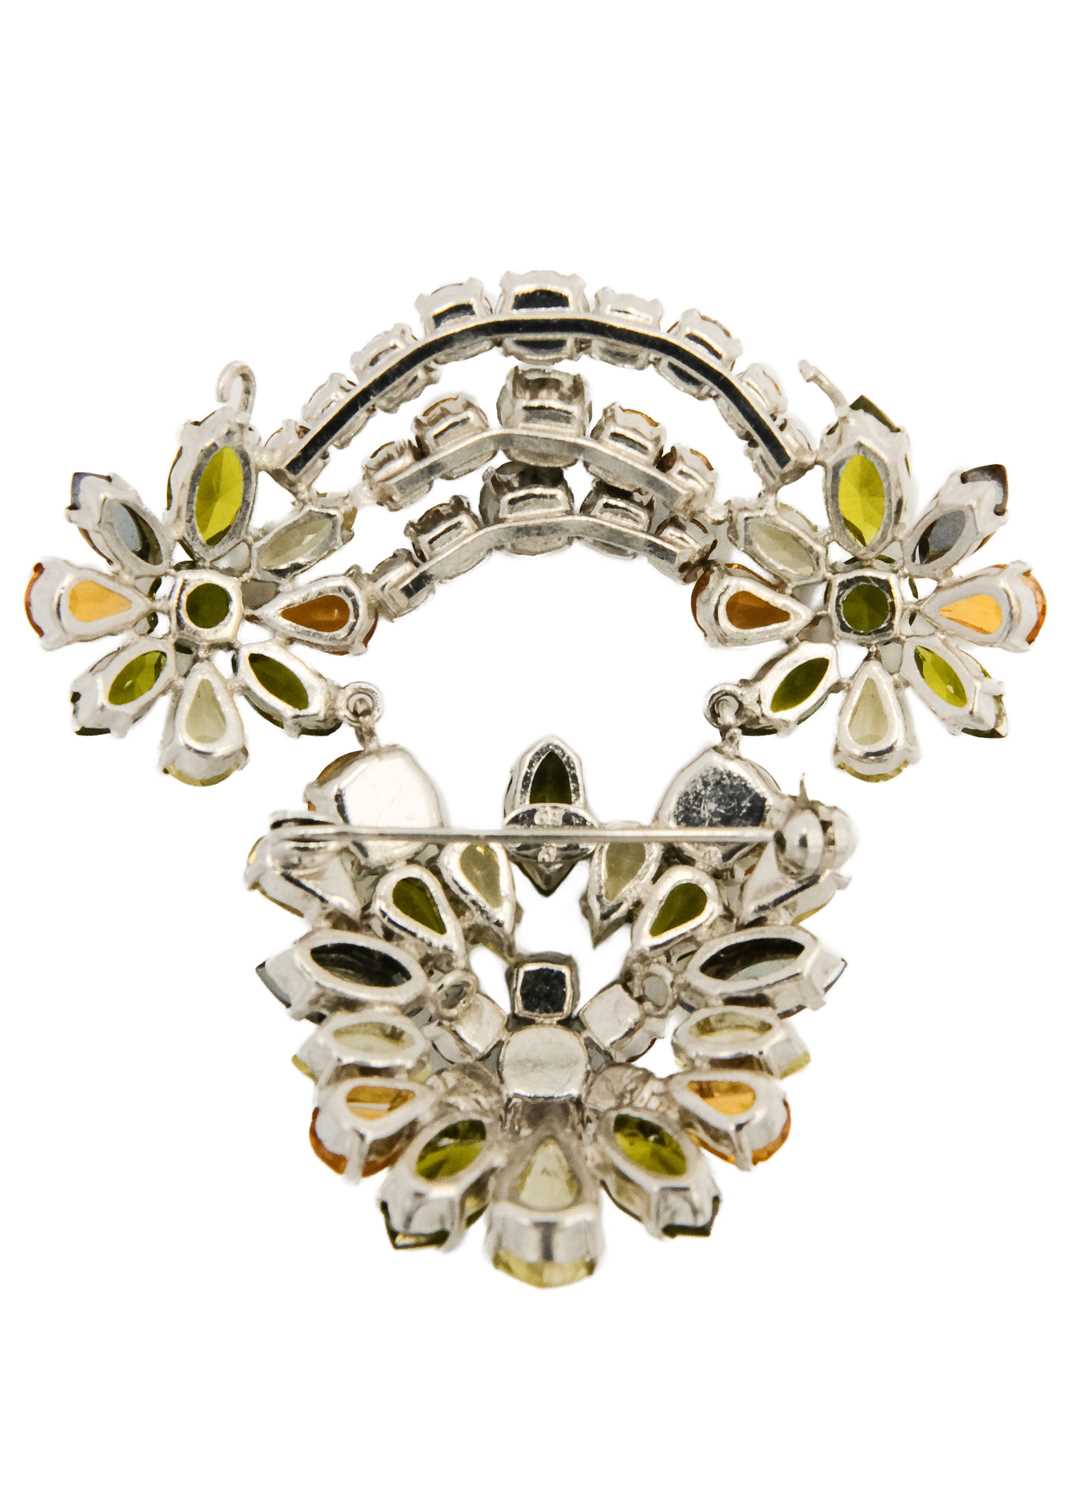 A Christian Dior 1950s paste set articulated brooch. - Image 2 of 4